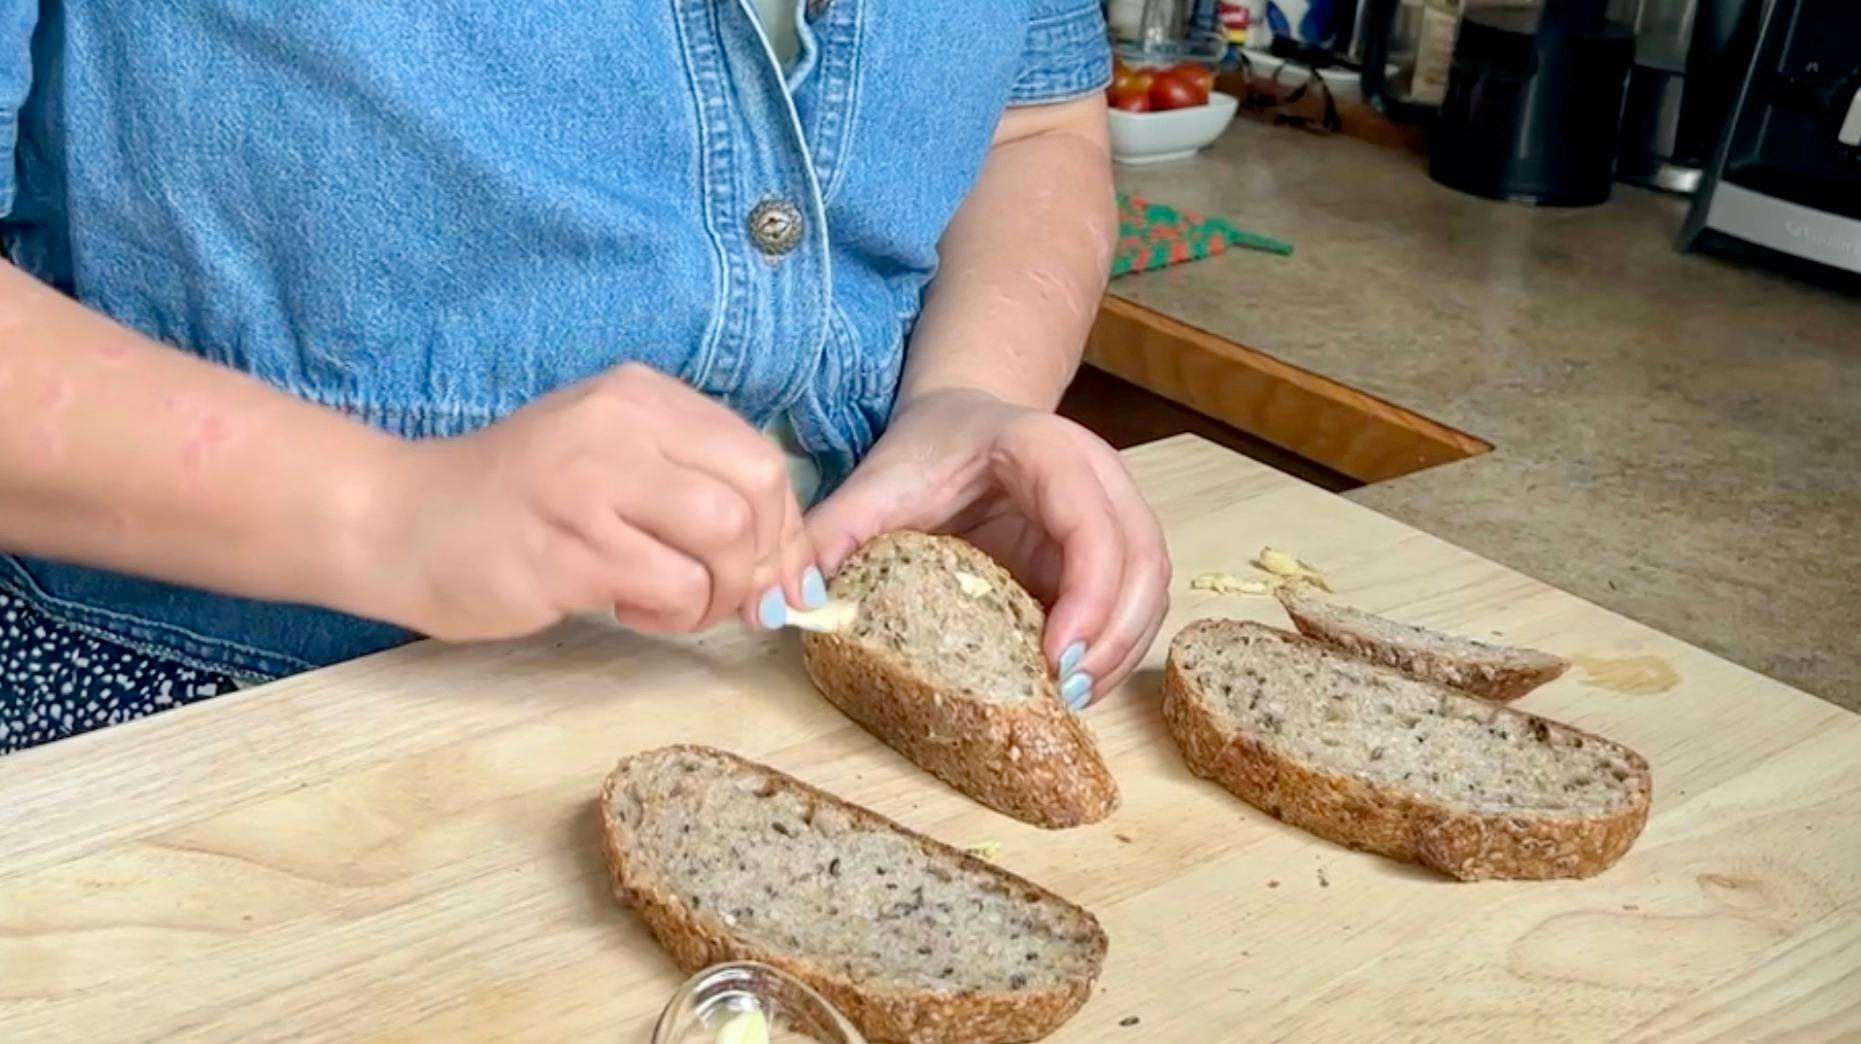 Rubbing garlic cloves on the bread slices